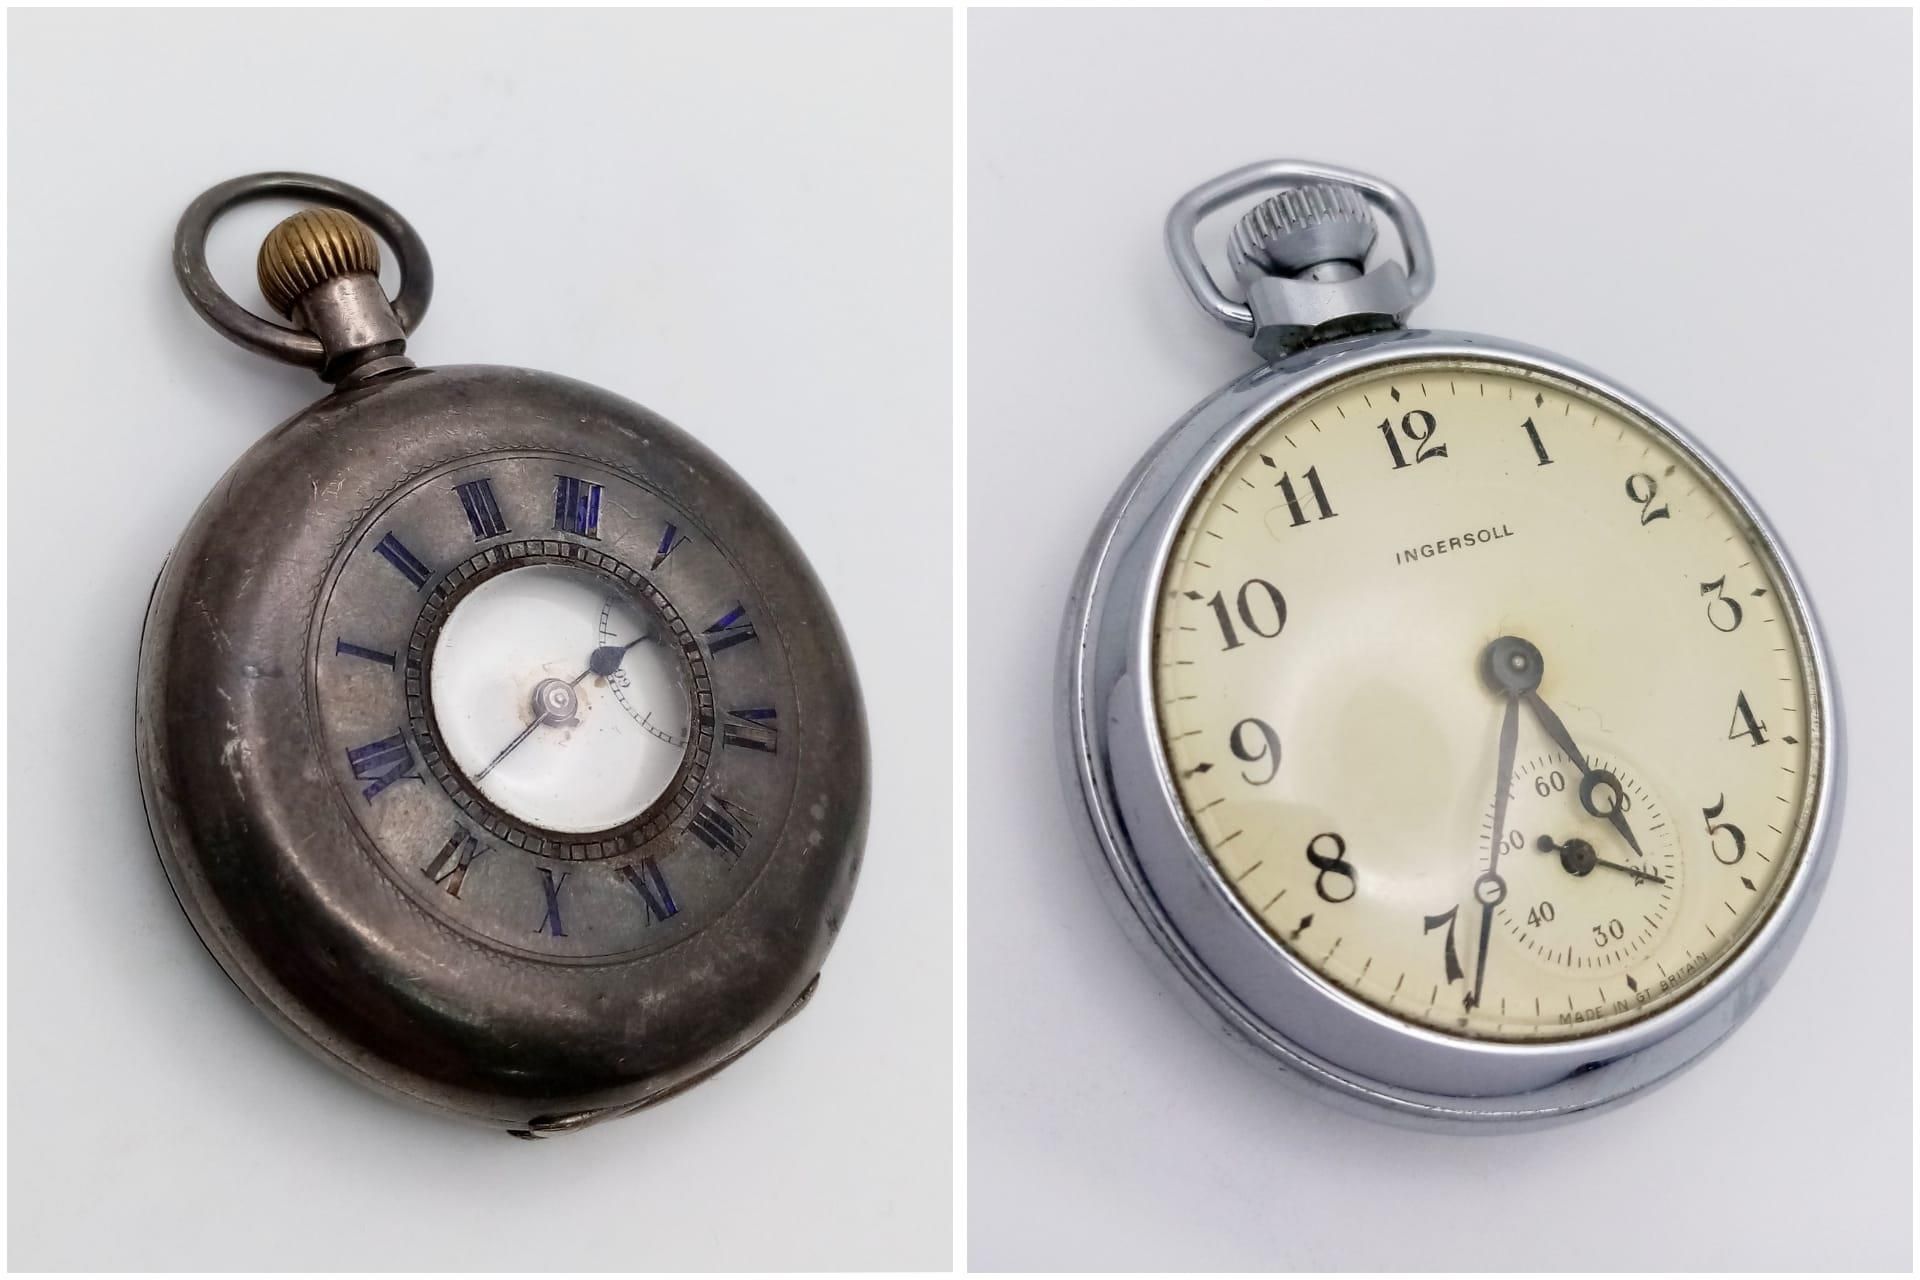 A Vintage and Antique Pocket Watch. Ingersoll vintage top-winder and antique (935)silver cased